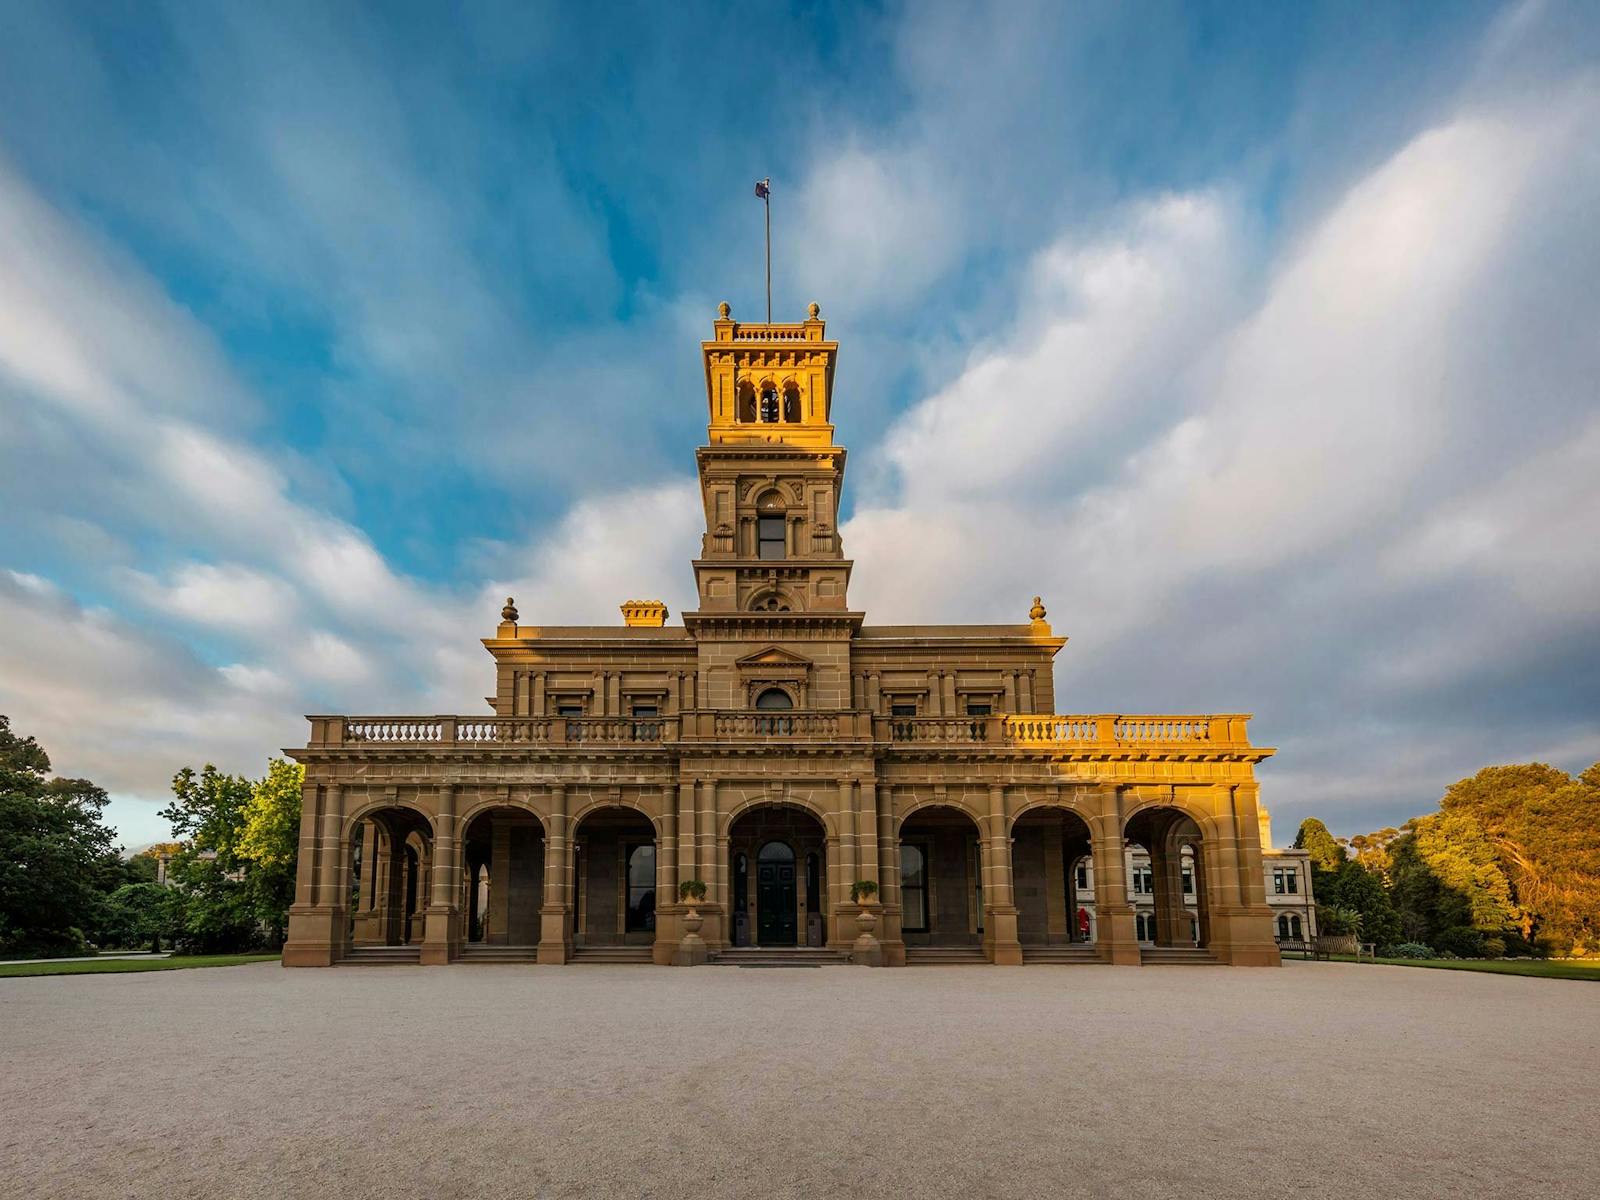 The historic Werribee Mansion, which you can tour during your stay